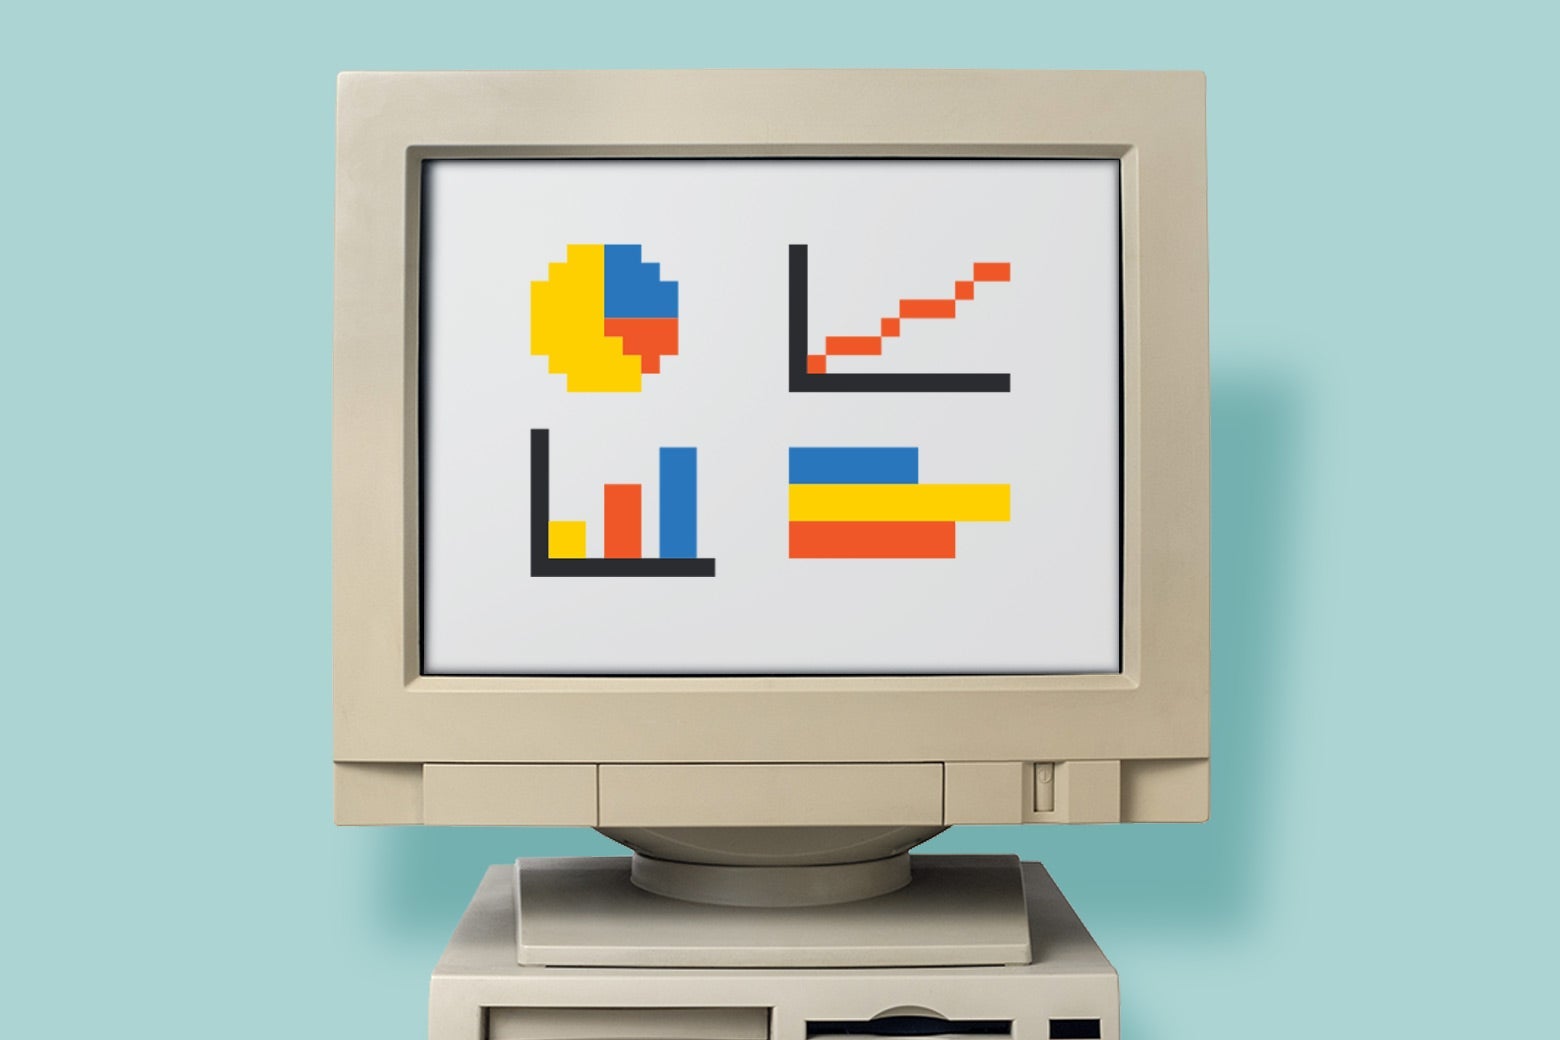 A computer with pixelated images of graphs (line graph, pie chart, bar graph). 